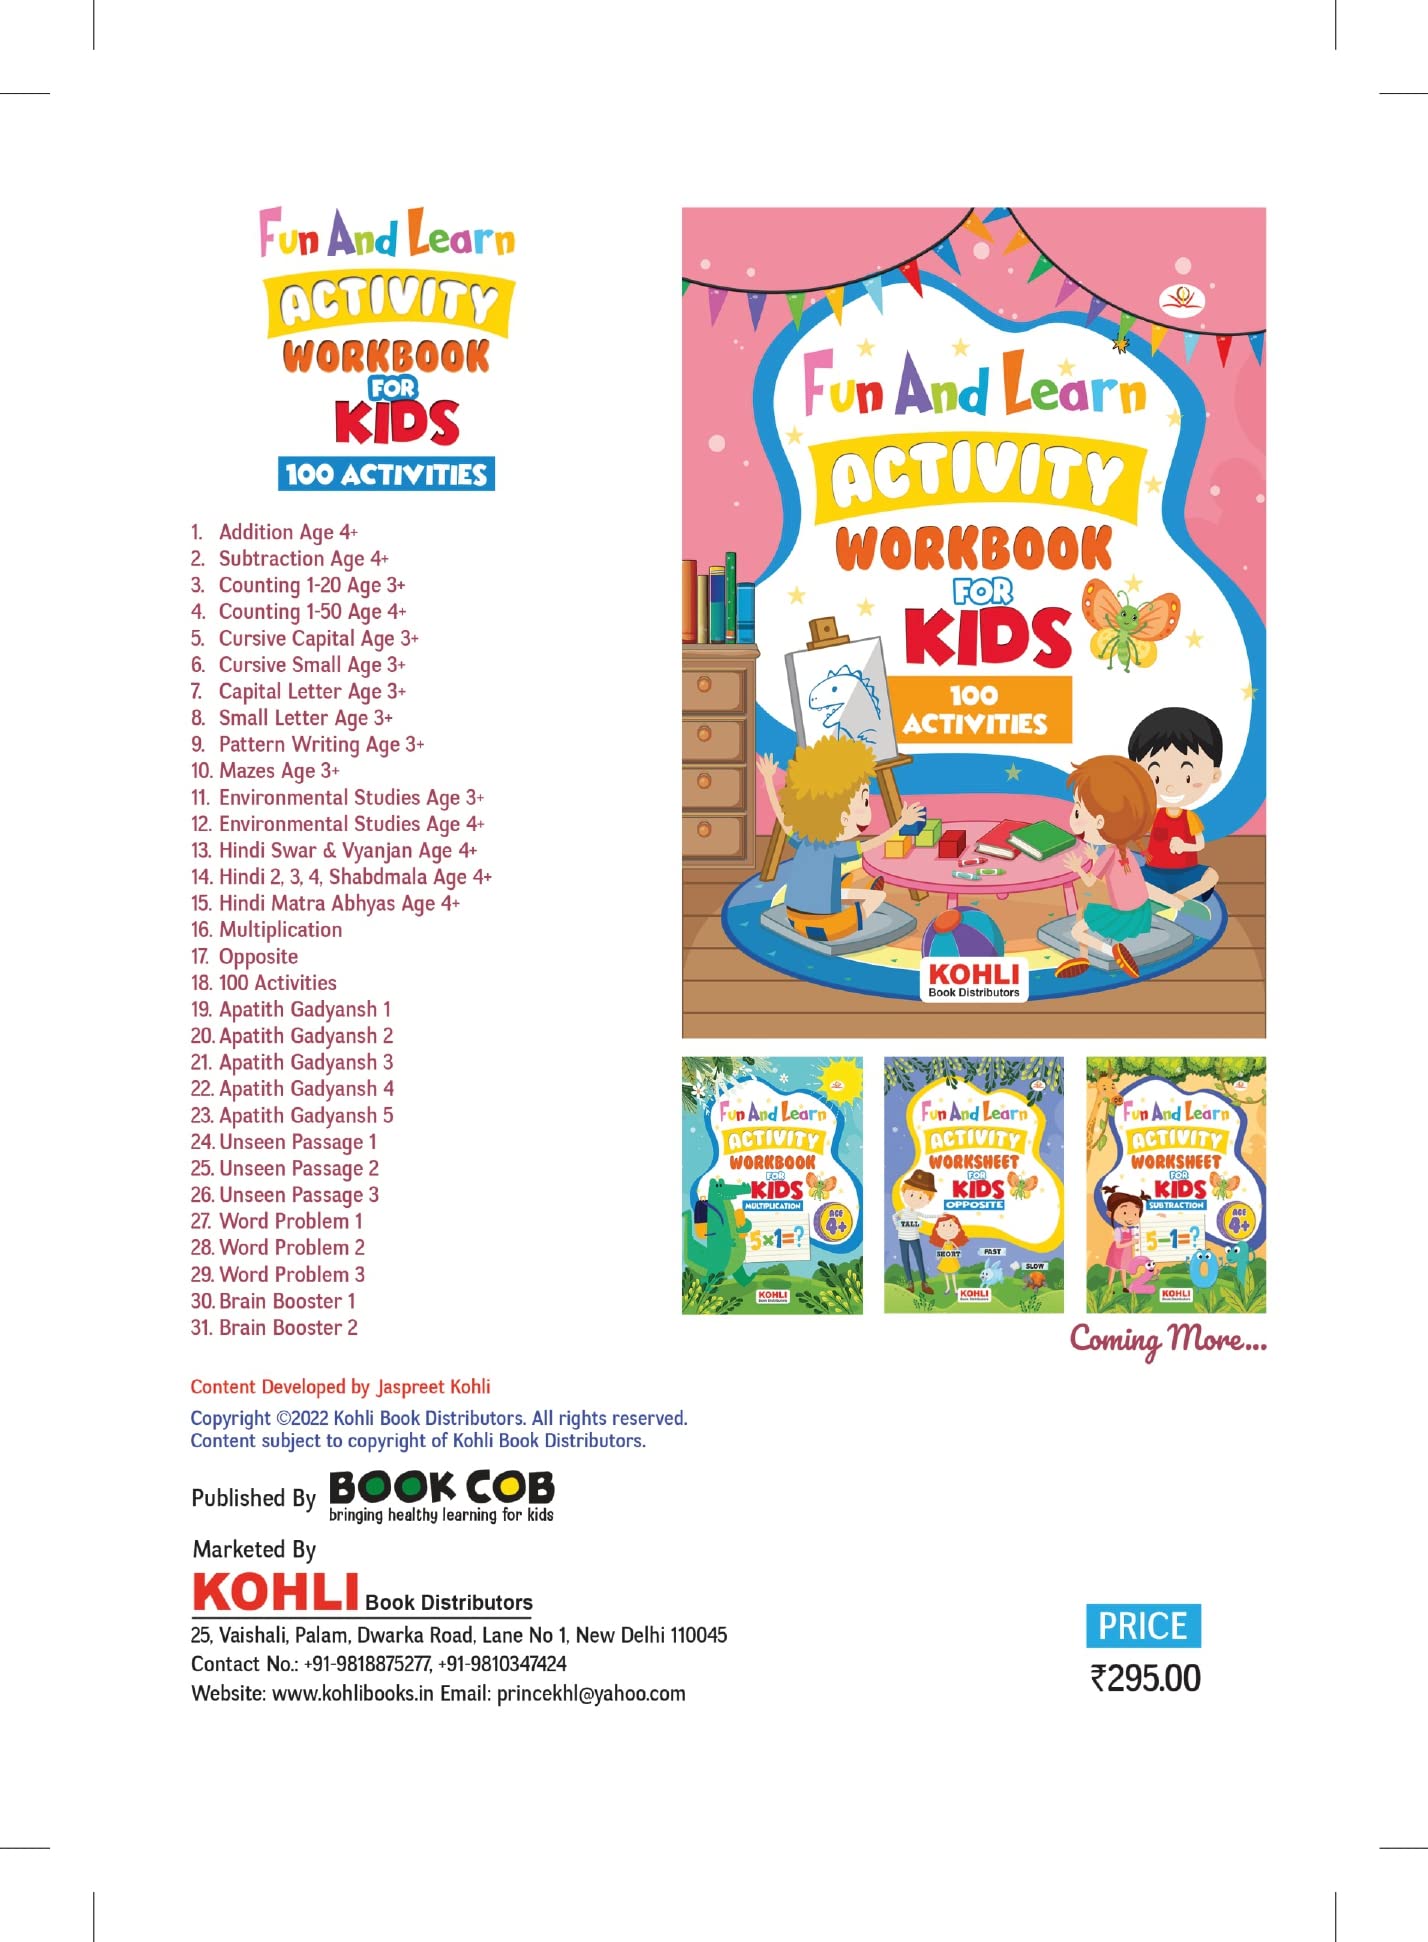 Fun And Learn Activity workbook For Kids 100 Activities